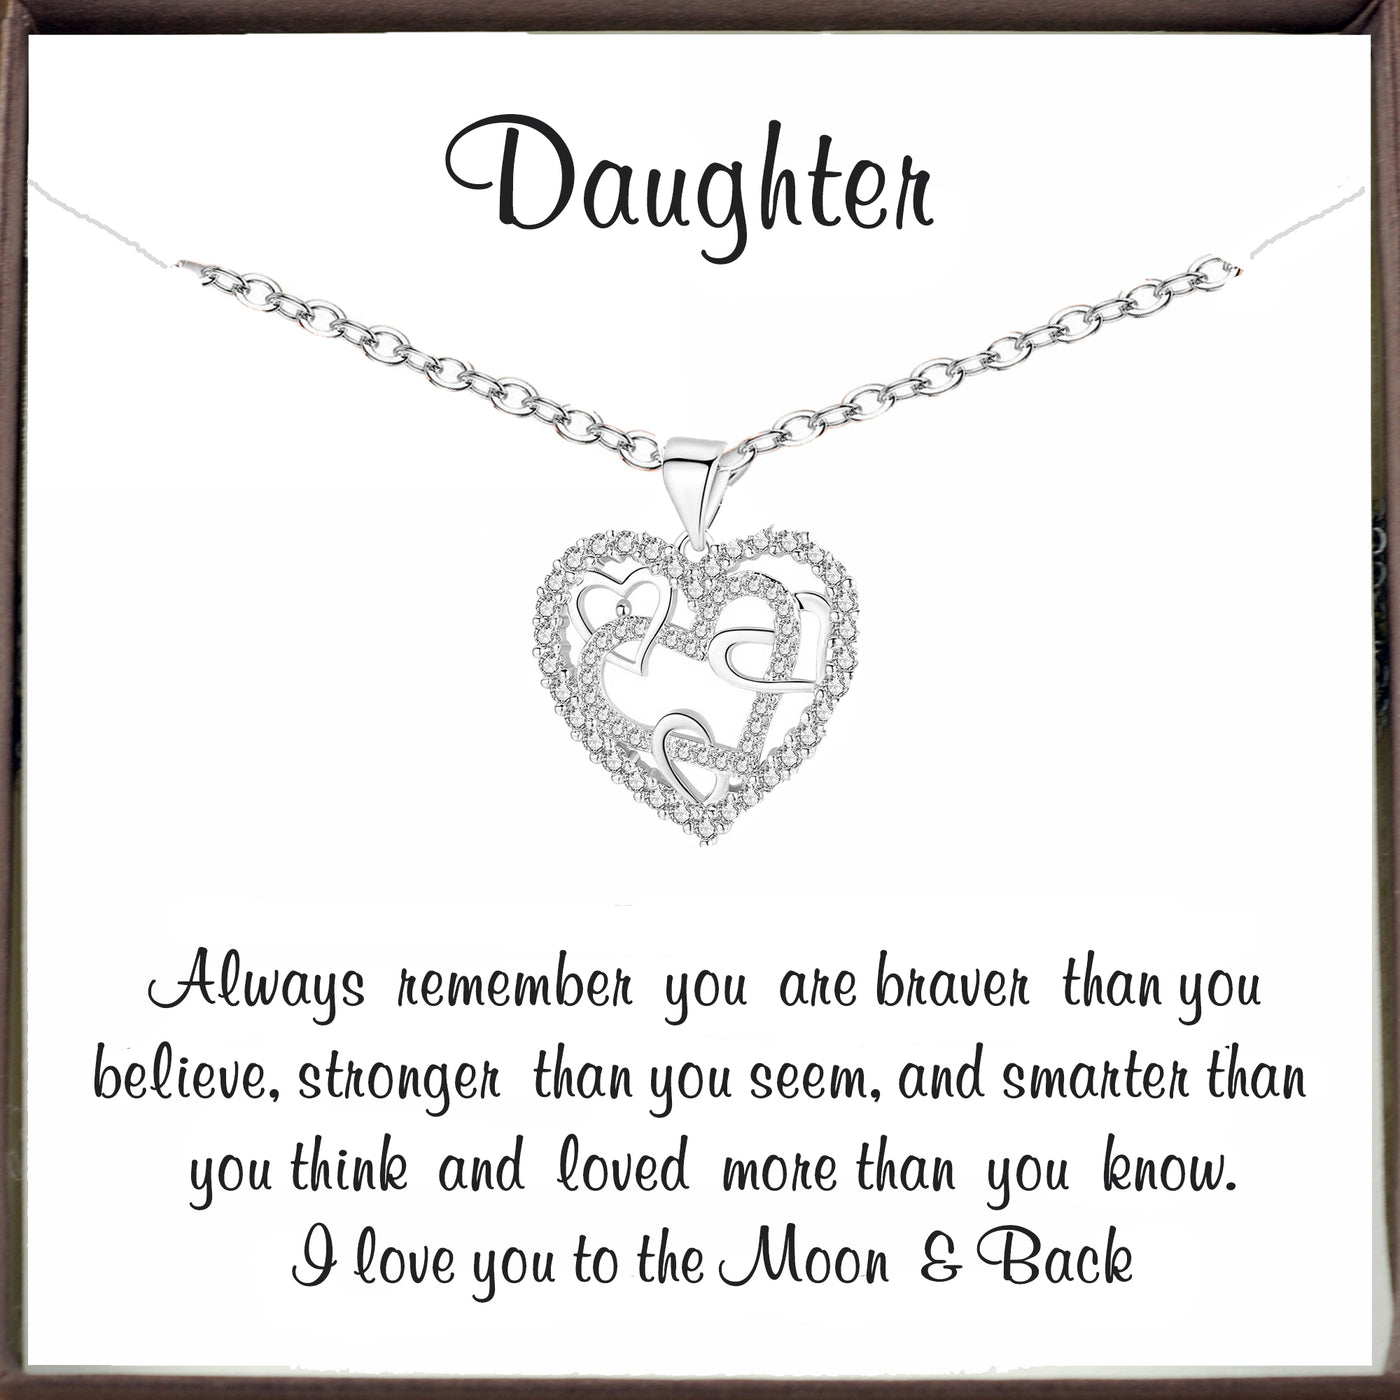 To my Daughter - Inspirational Heart Necklace - Godfullness